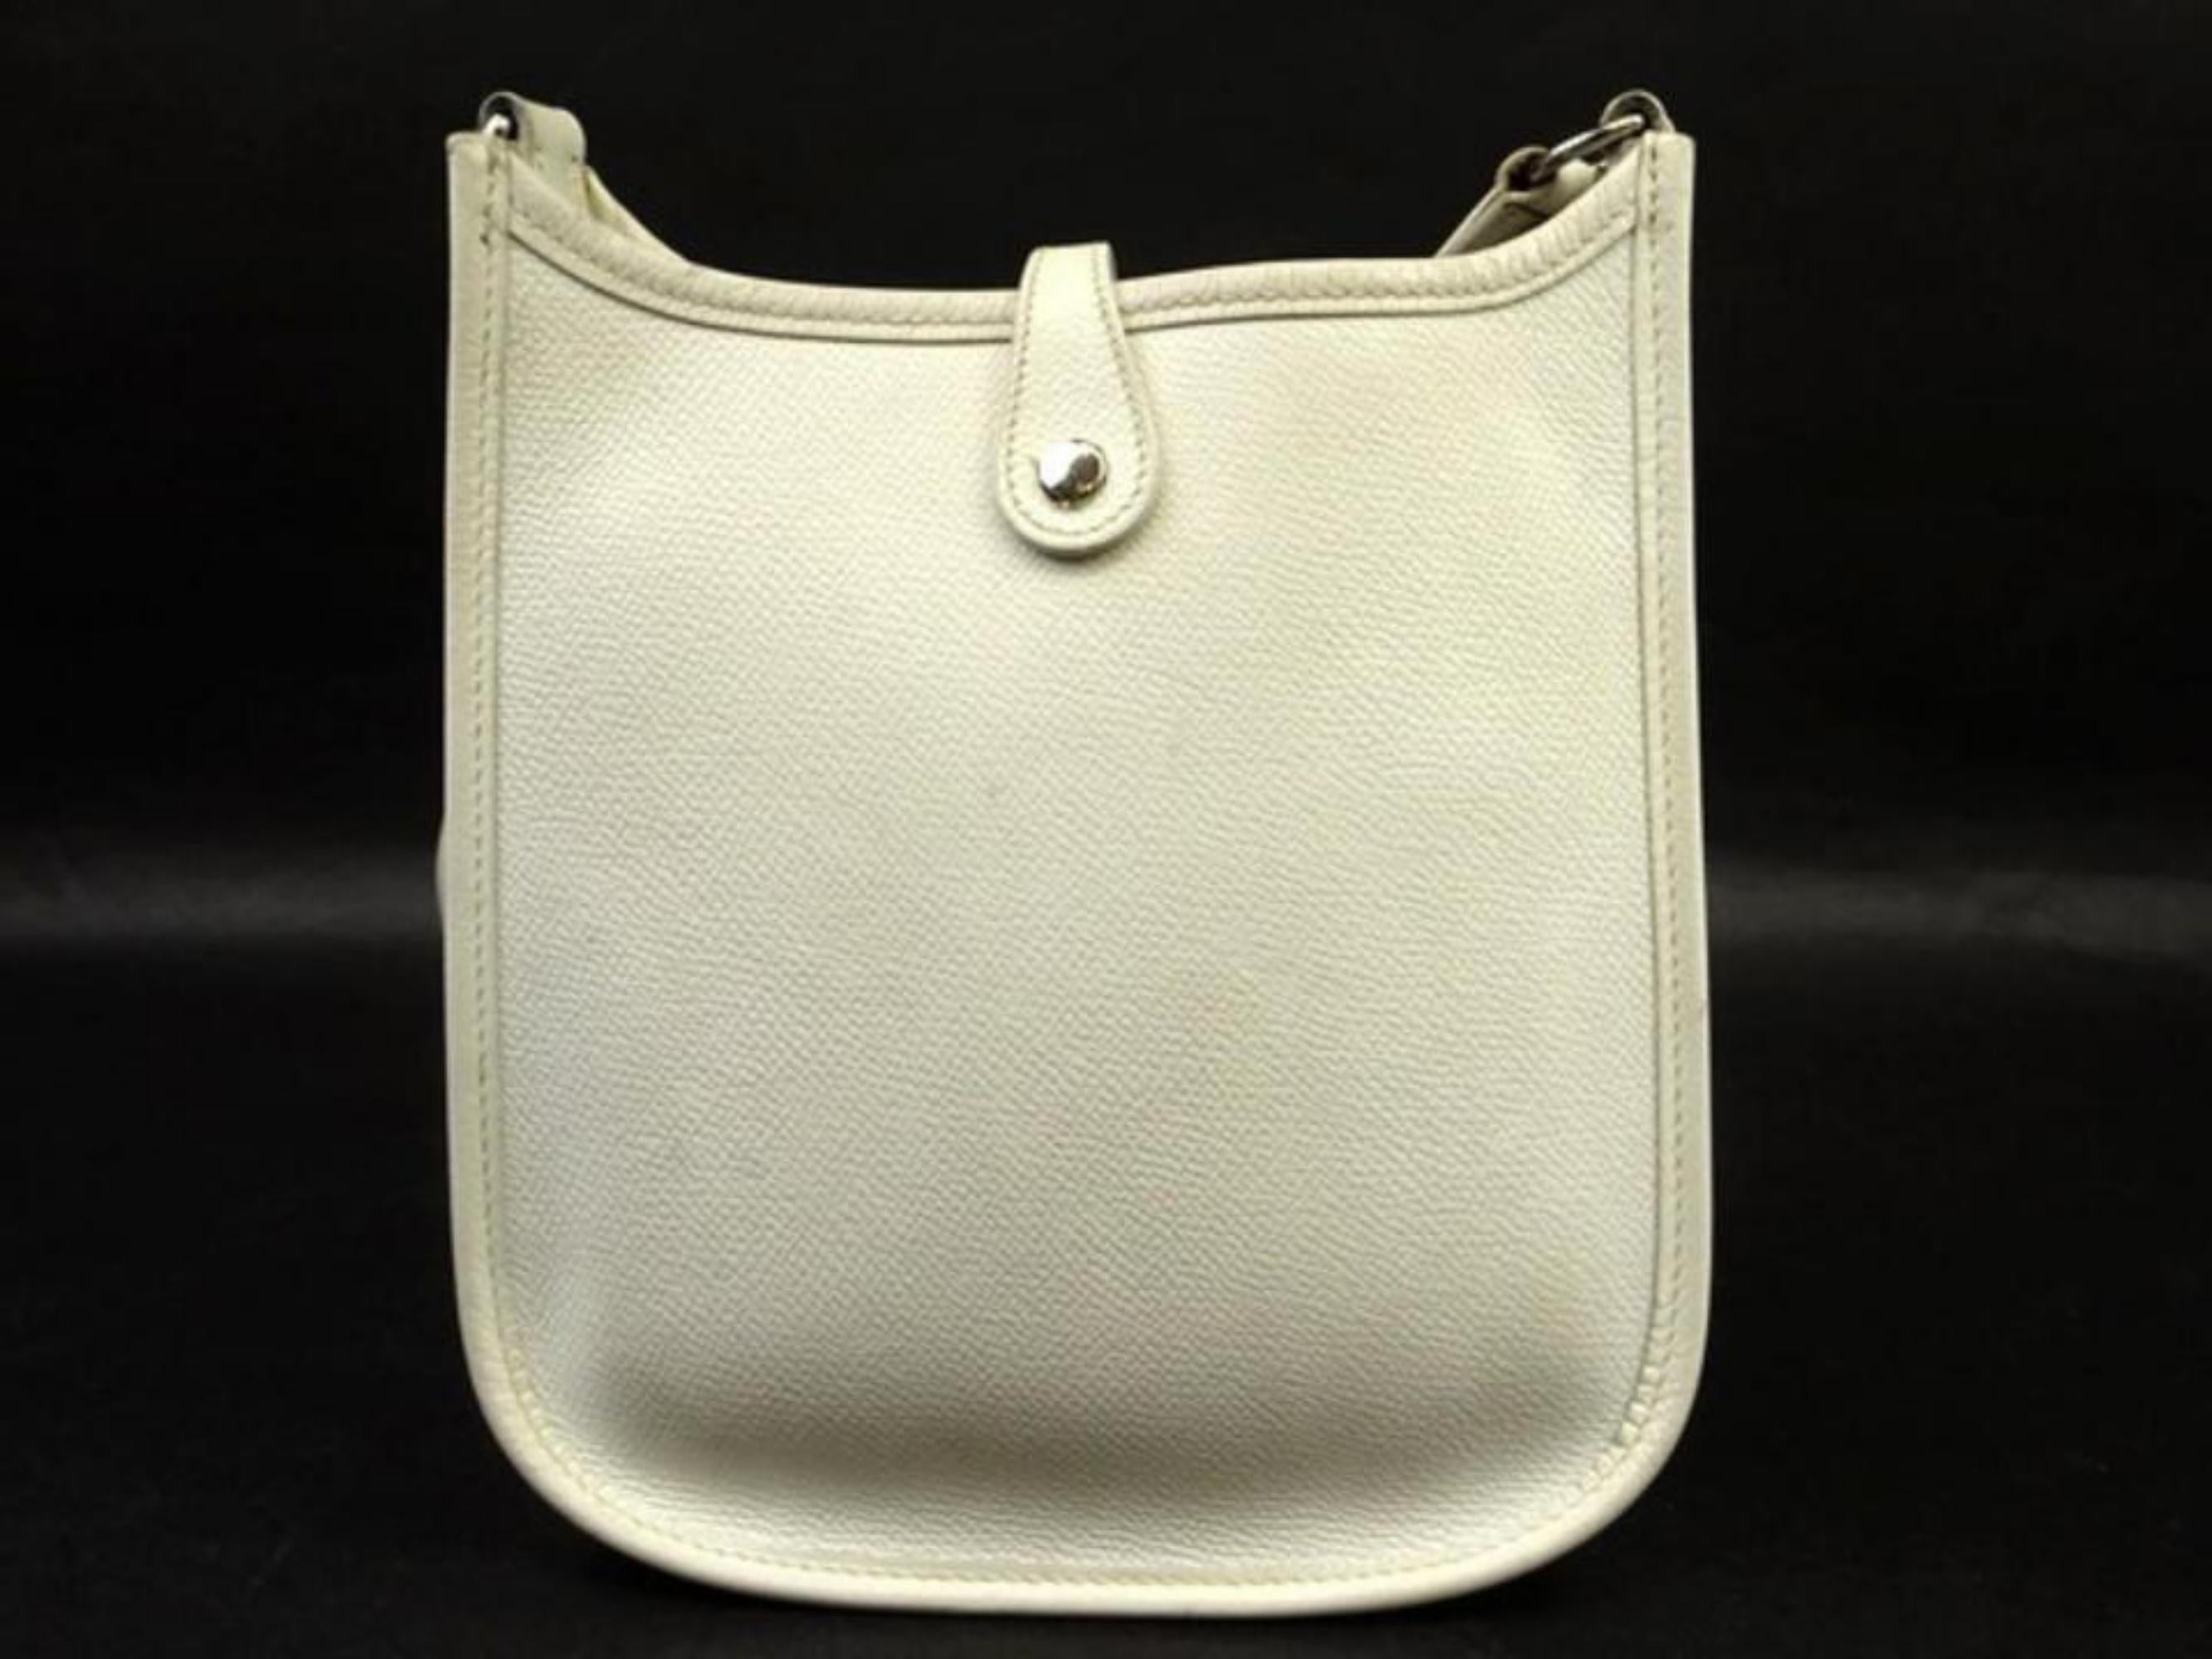 Hermès Evelyne Tpm 221996 White Epsom Leather Cross Body Bag In Good Condition For Sale In Forest Hills, NY